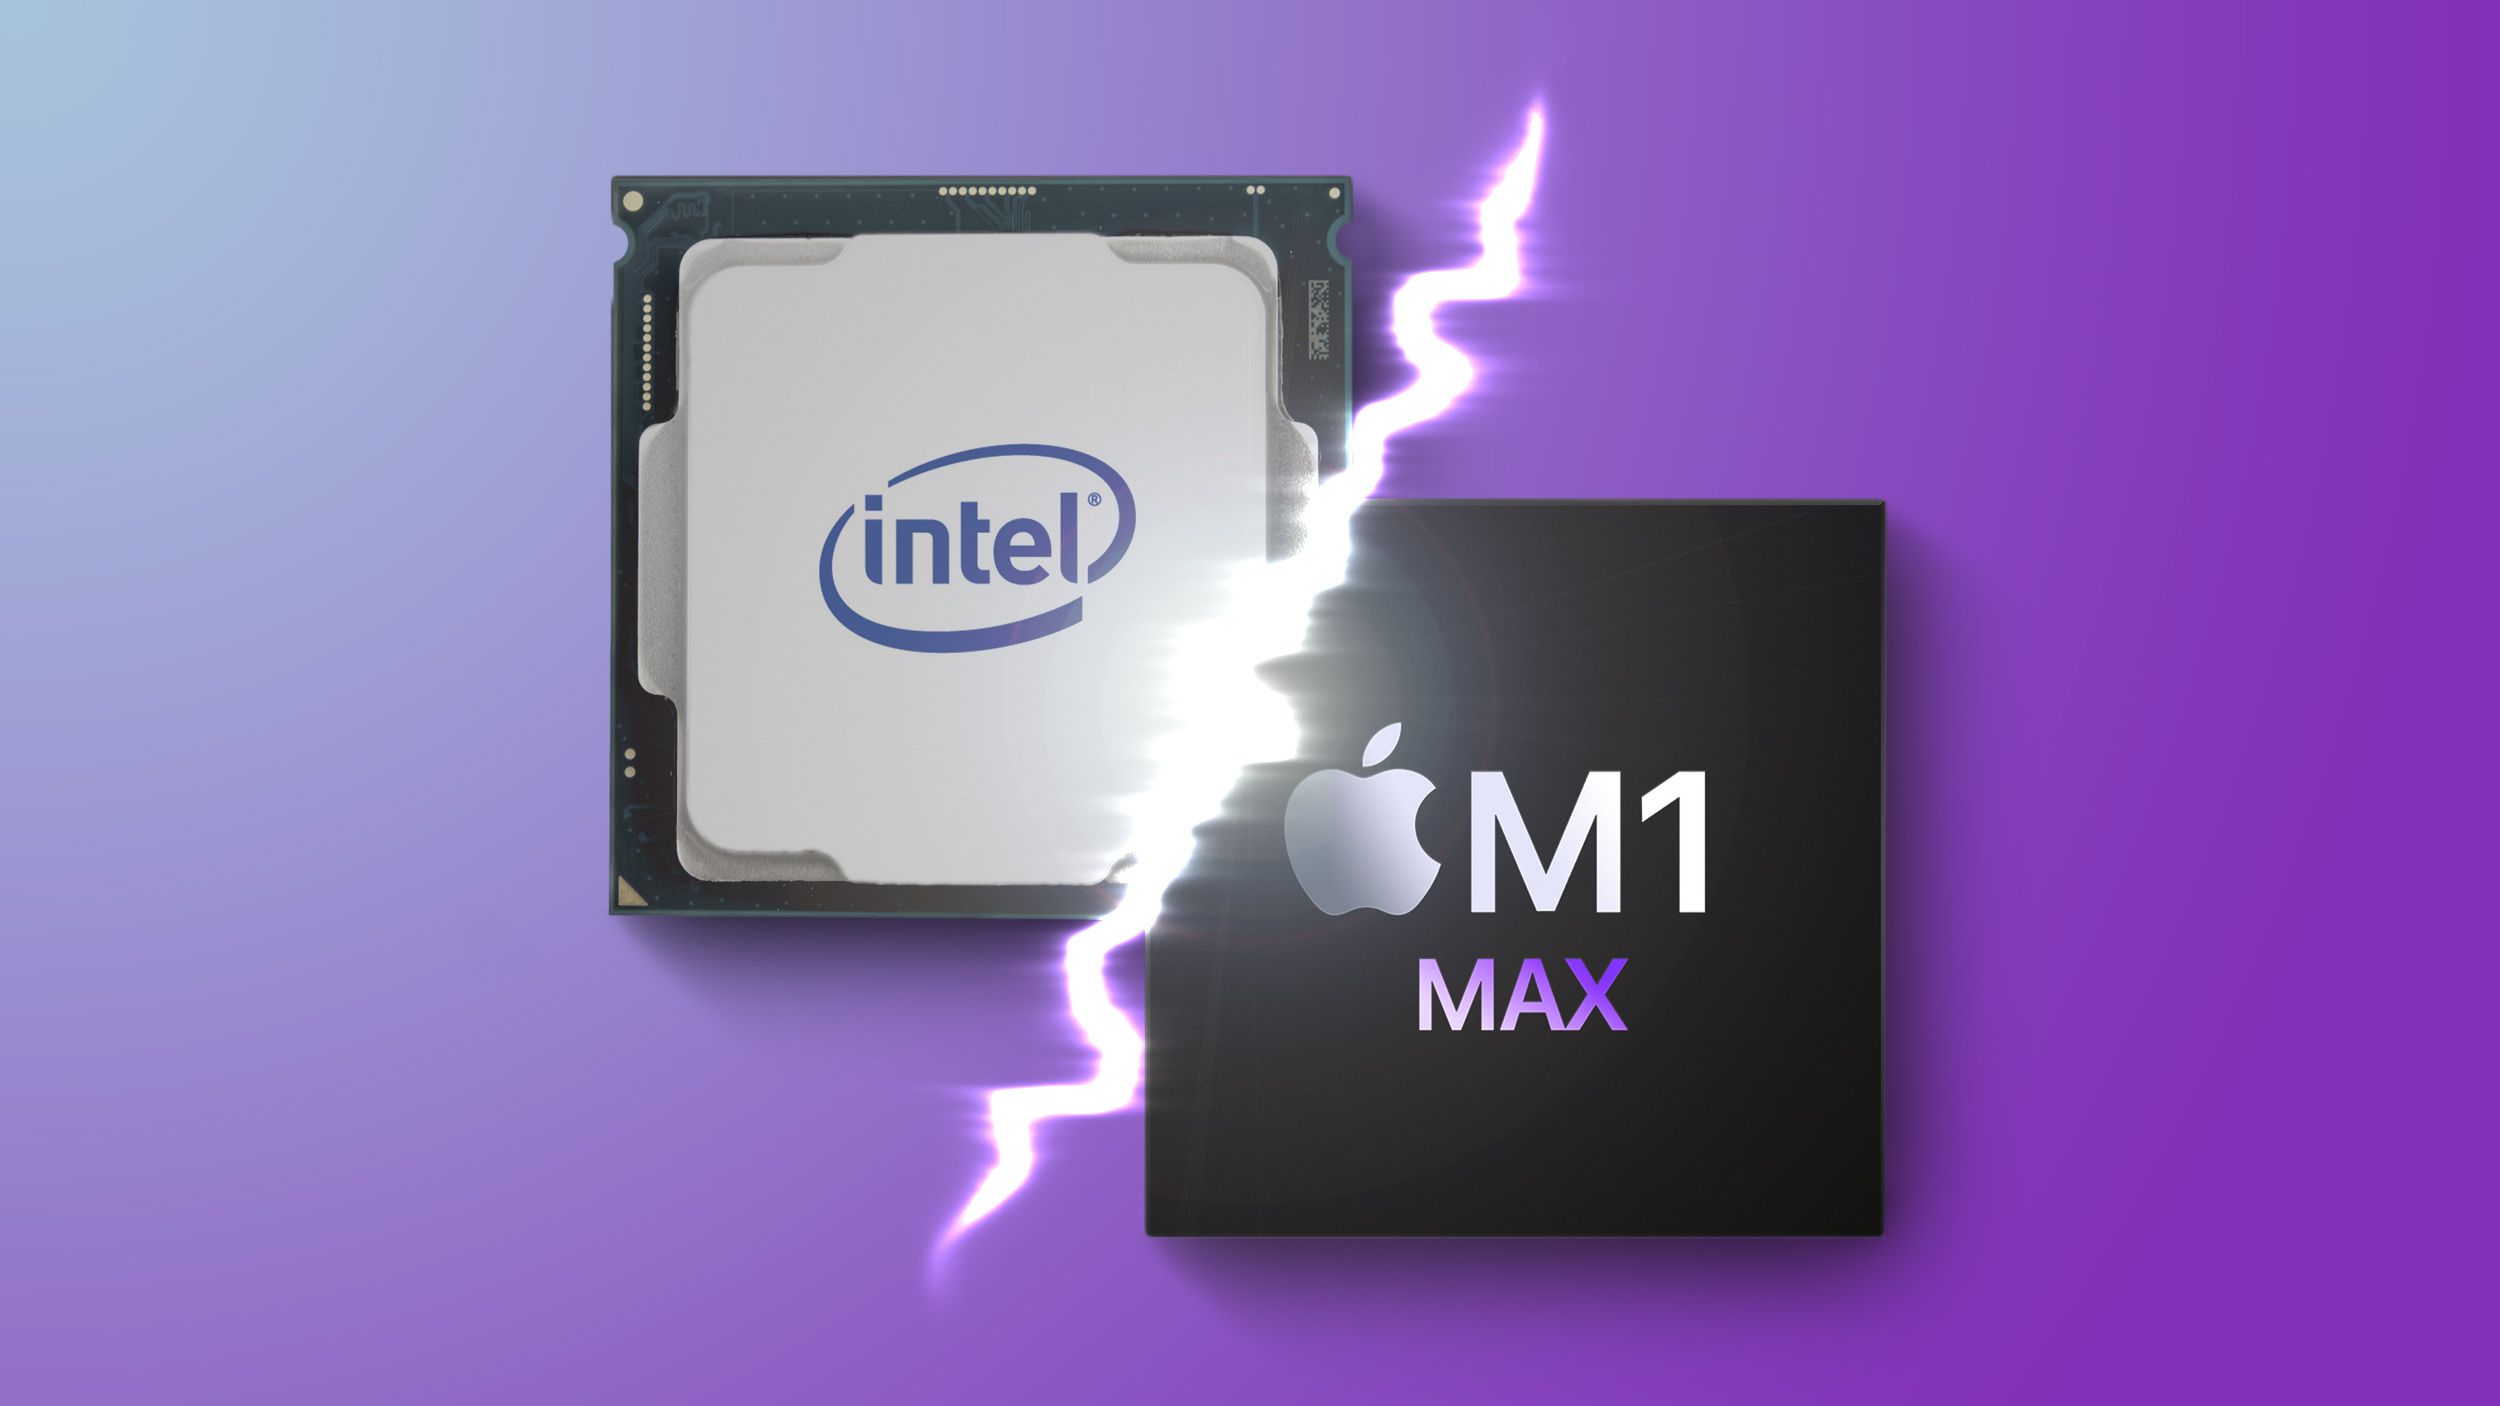 Benchmarks Confirm Intel's Latest Core i9 Chip Outperforms Apple's M1 Max With Several Caveats